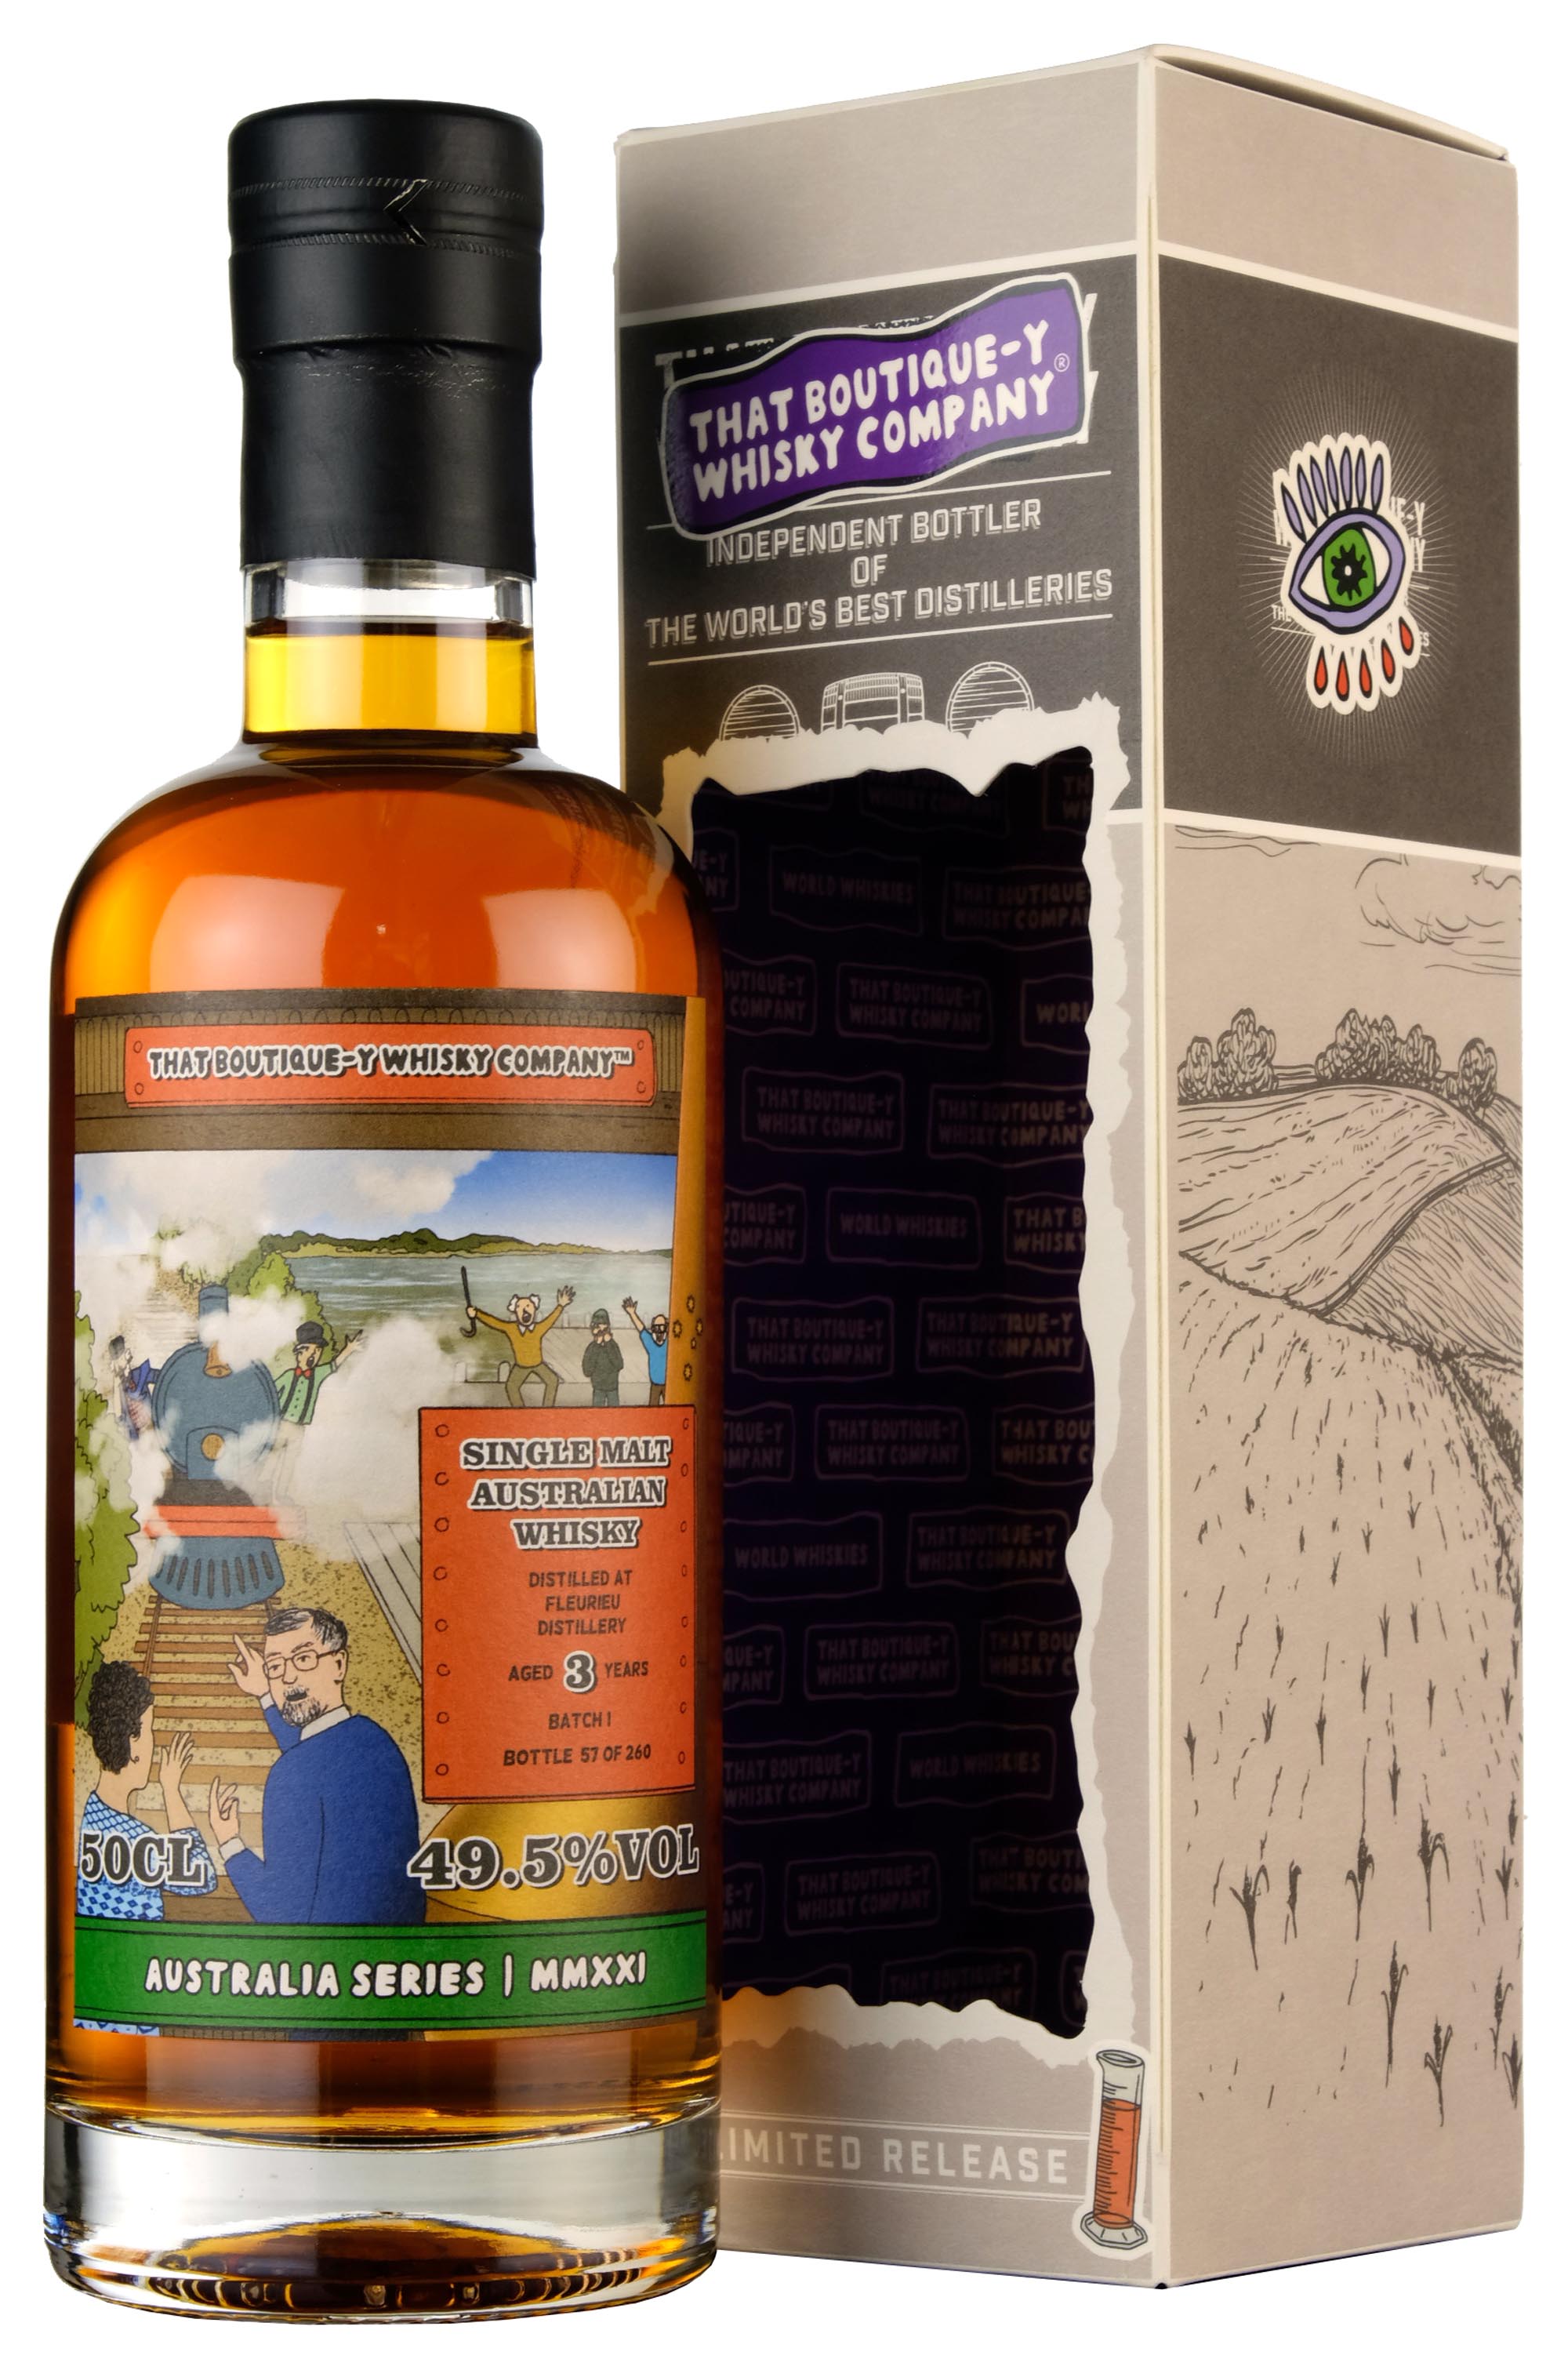 Fleurieu 3 Year Old | That Boutique-y Whisky Company Batch 1